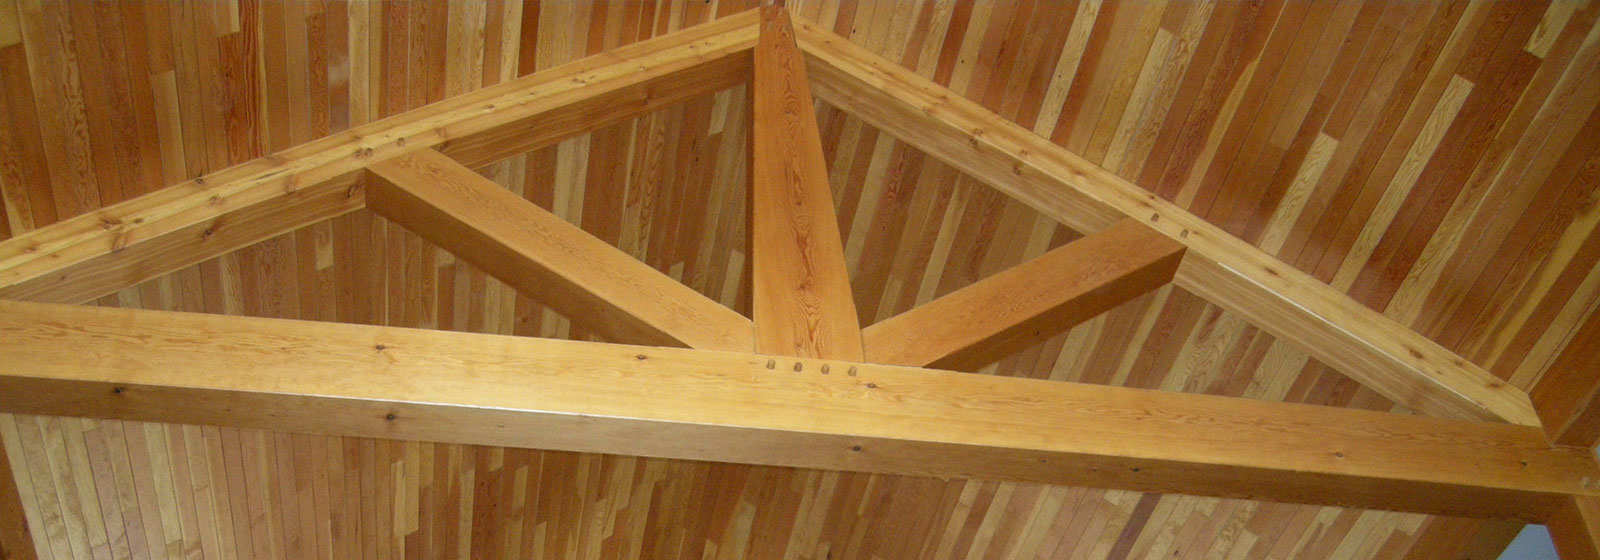 Custom designed timber truss in a timber frame hybrid home by Log and Timber Works British Columbia